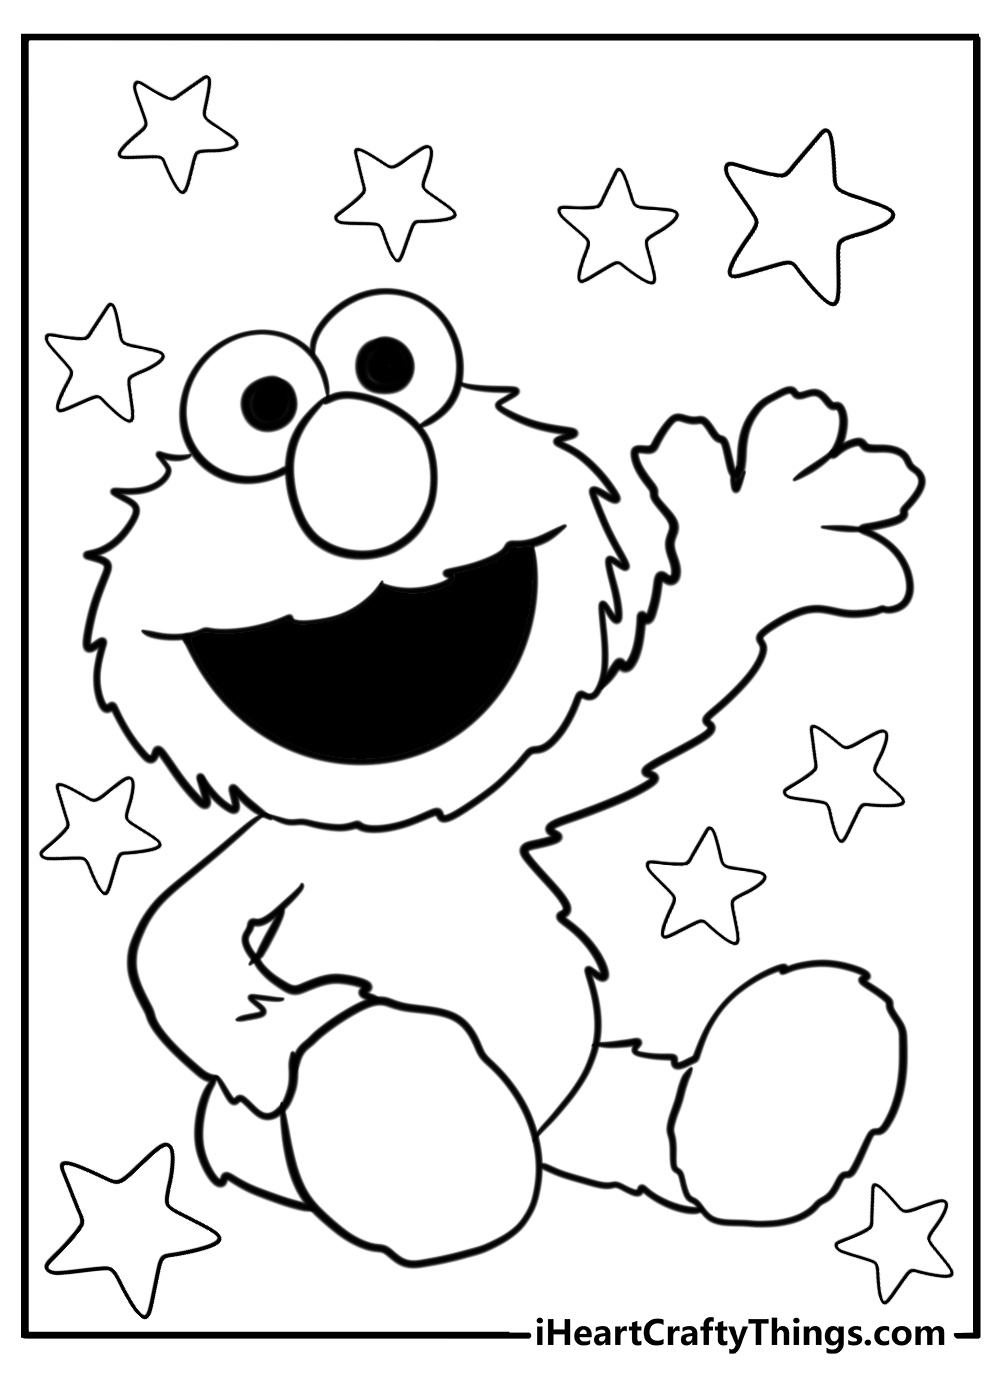 Easy outline of elmo to color for preschoolers